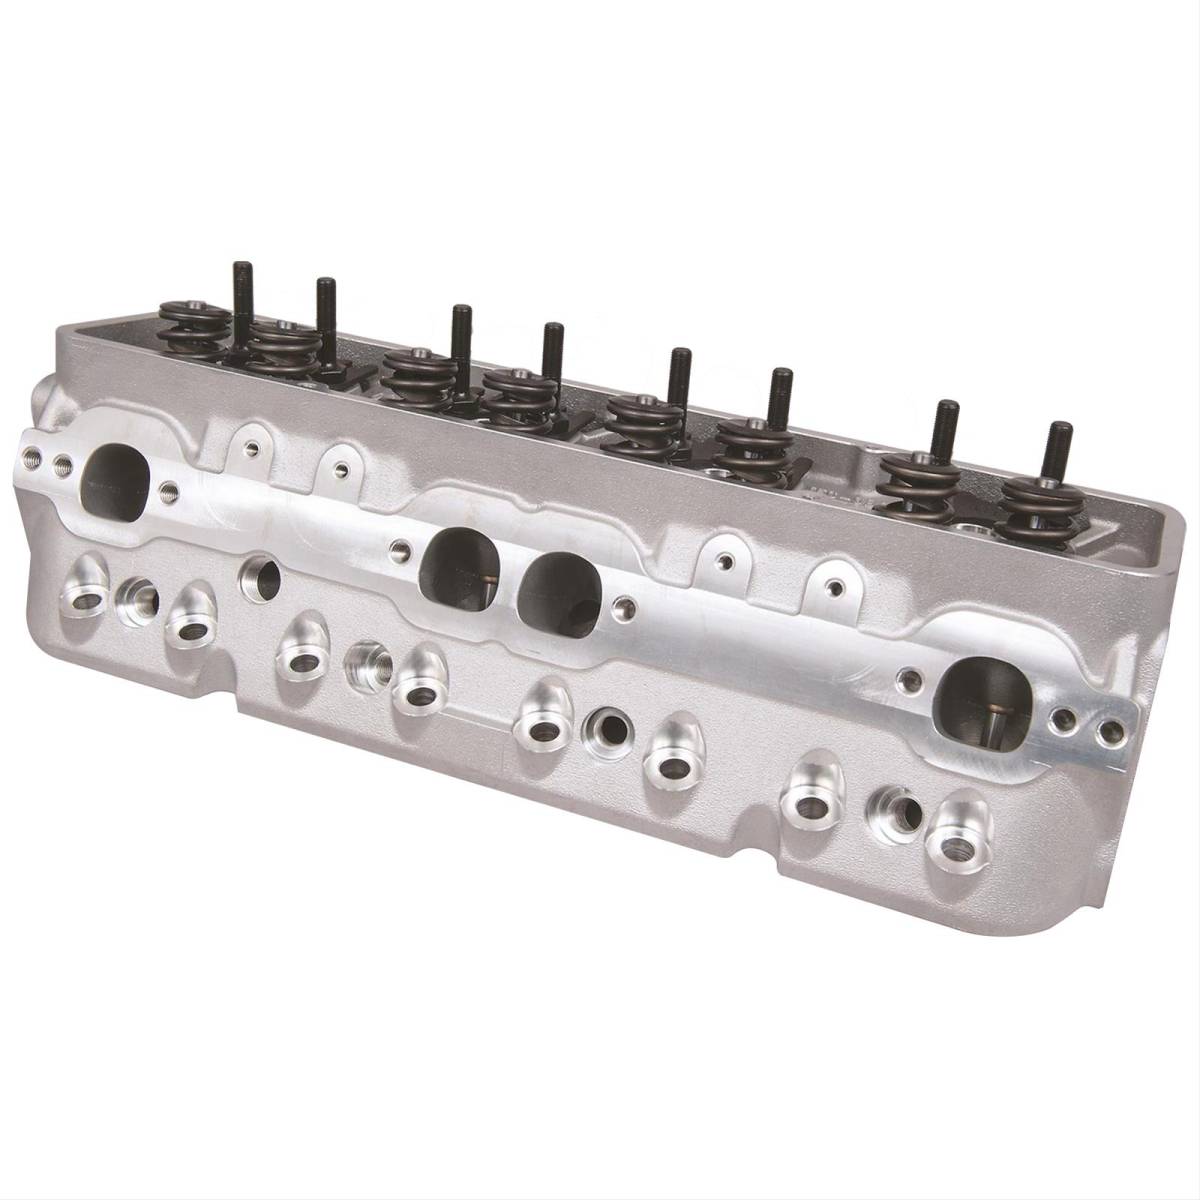 Trickflow - Trickflow Super 23 Cylinder Heads, SB Chevy, 195cc Intake, 64cc Chambers, 1.470" Springs, Perimeter Bolt - Image 1